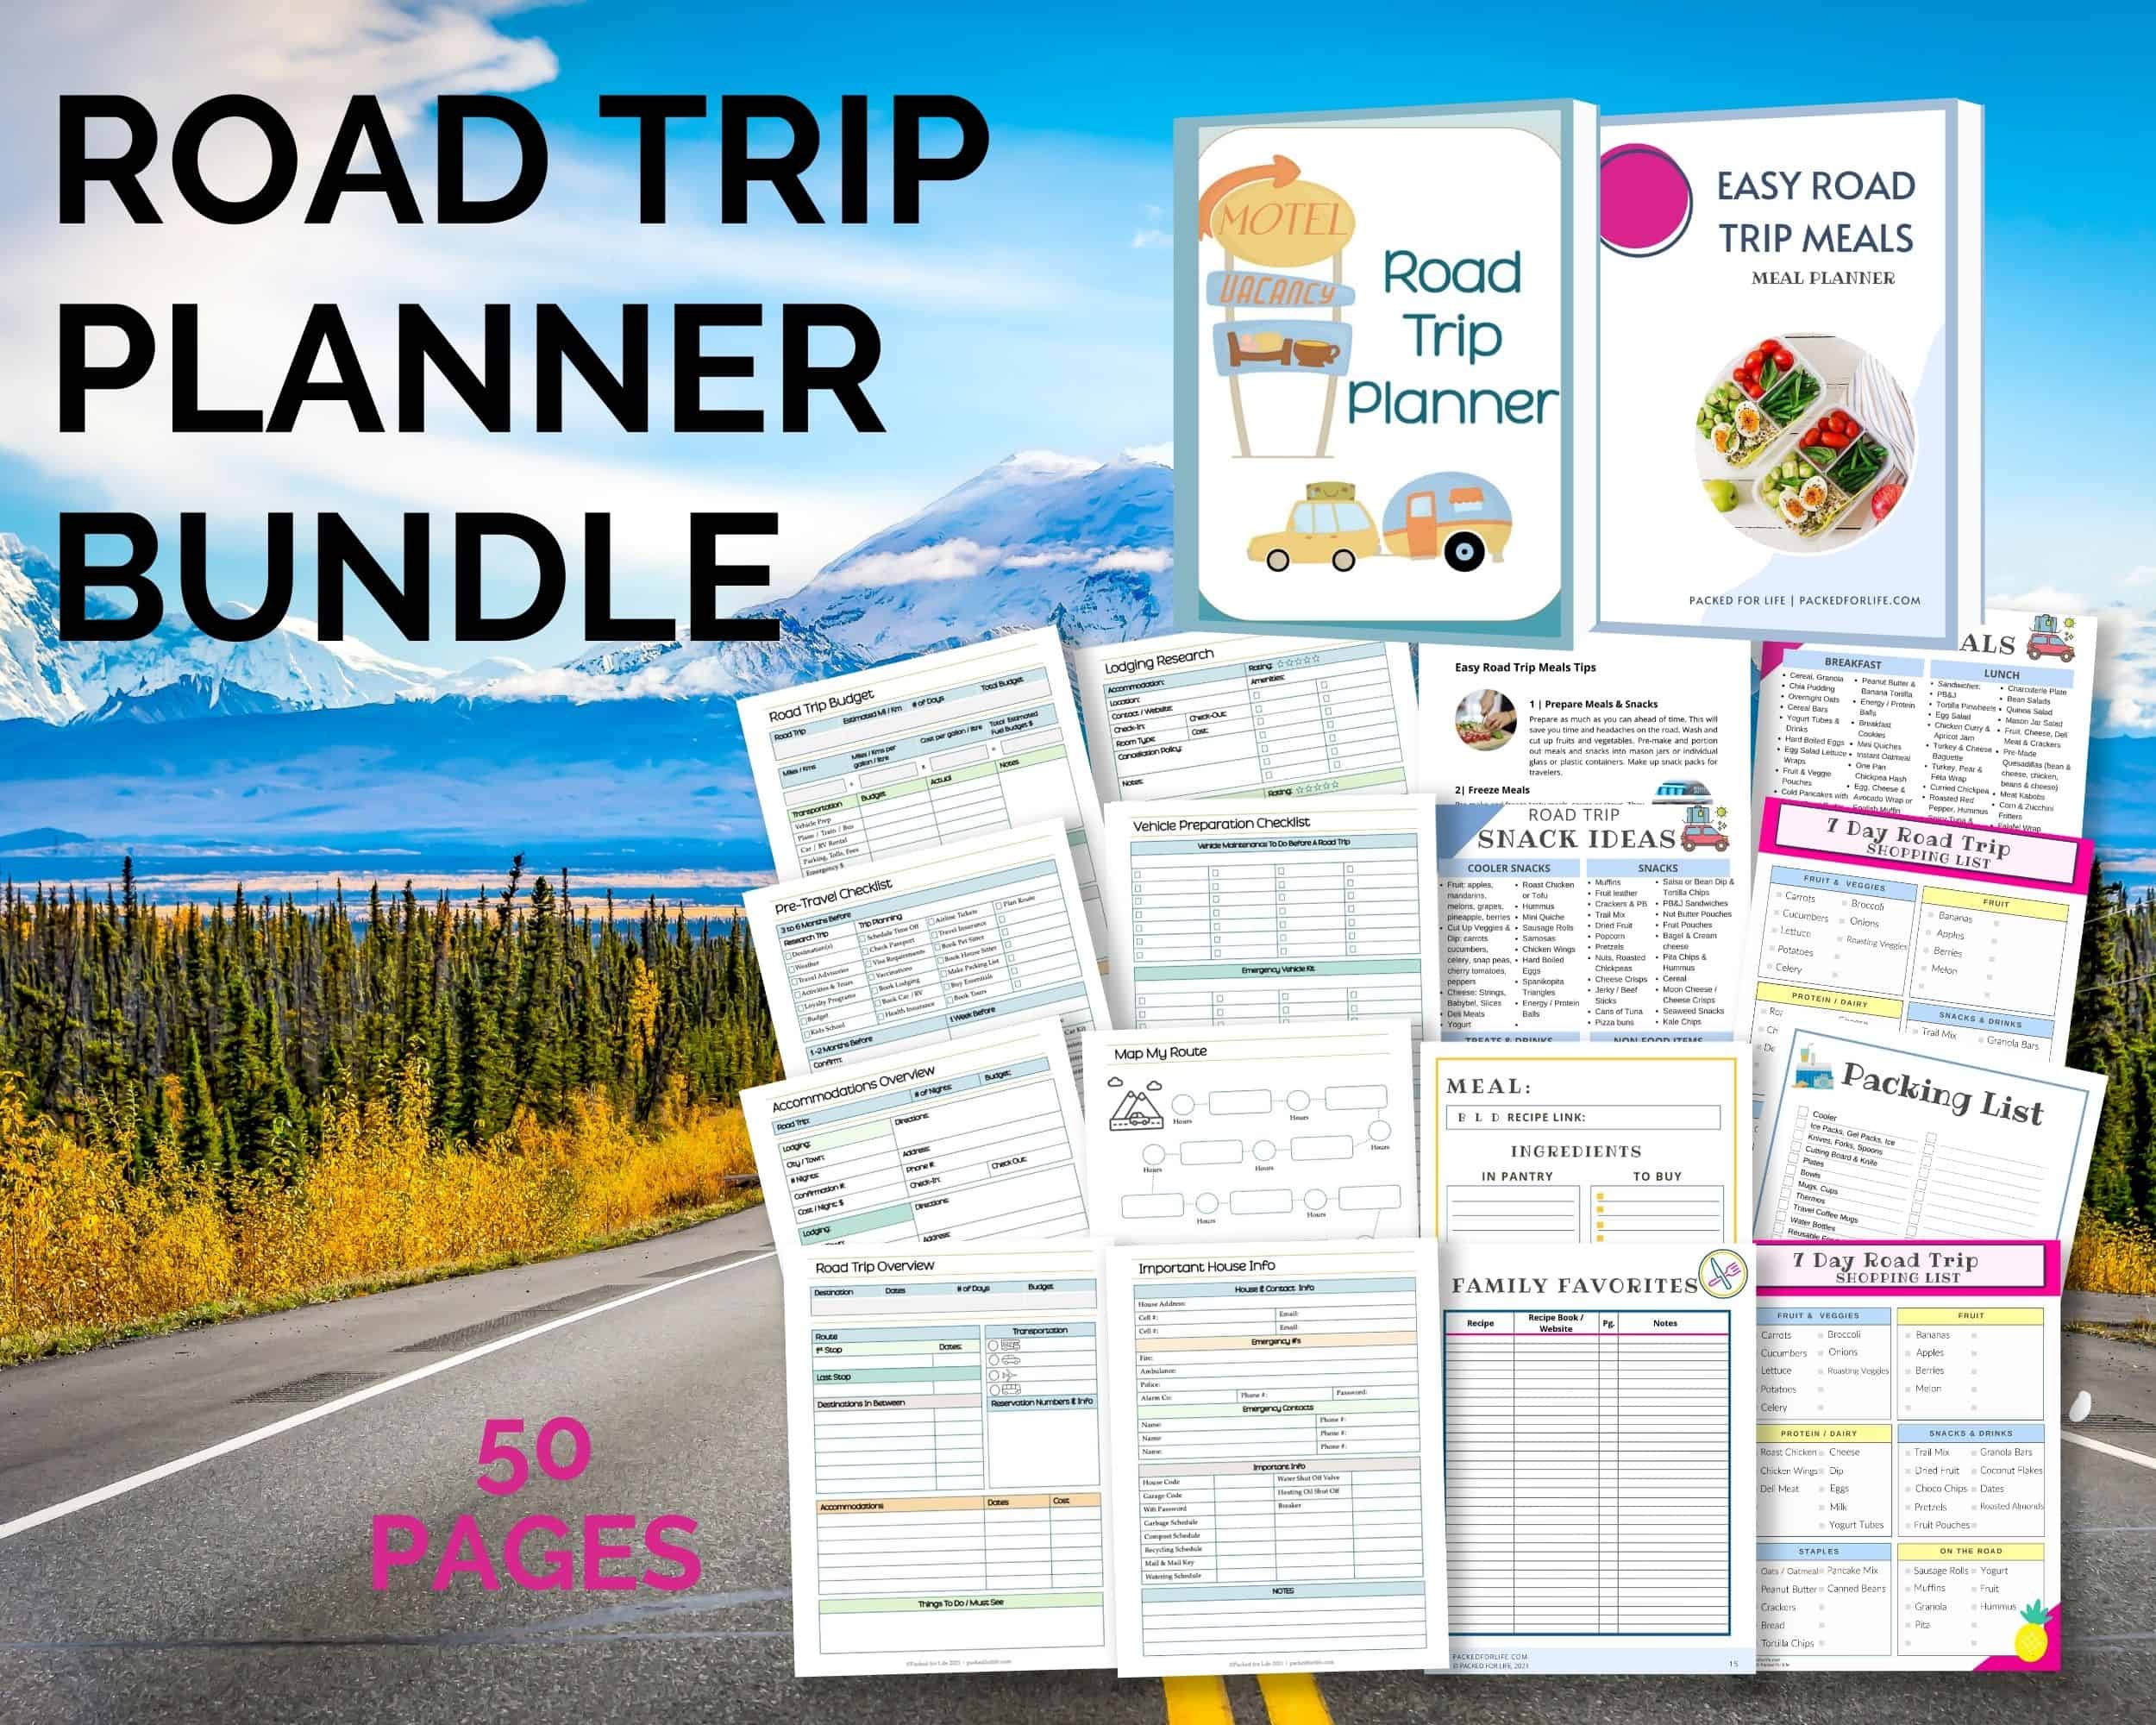 Road trip planner & Easy Road Trip Meals printable pages fanned out over a road leading to snowcapped mountain.